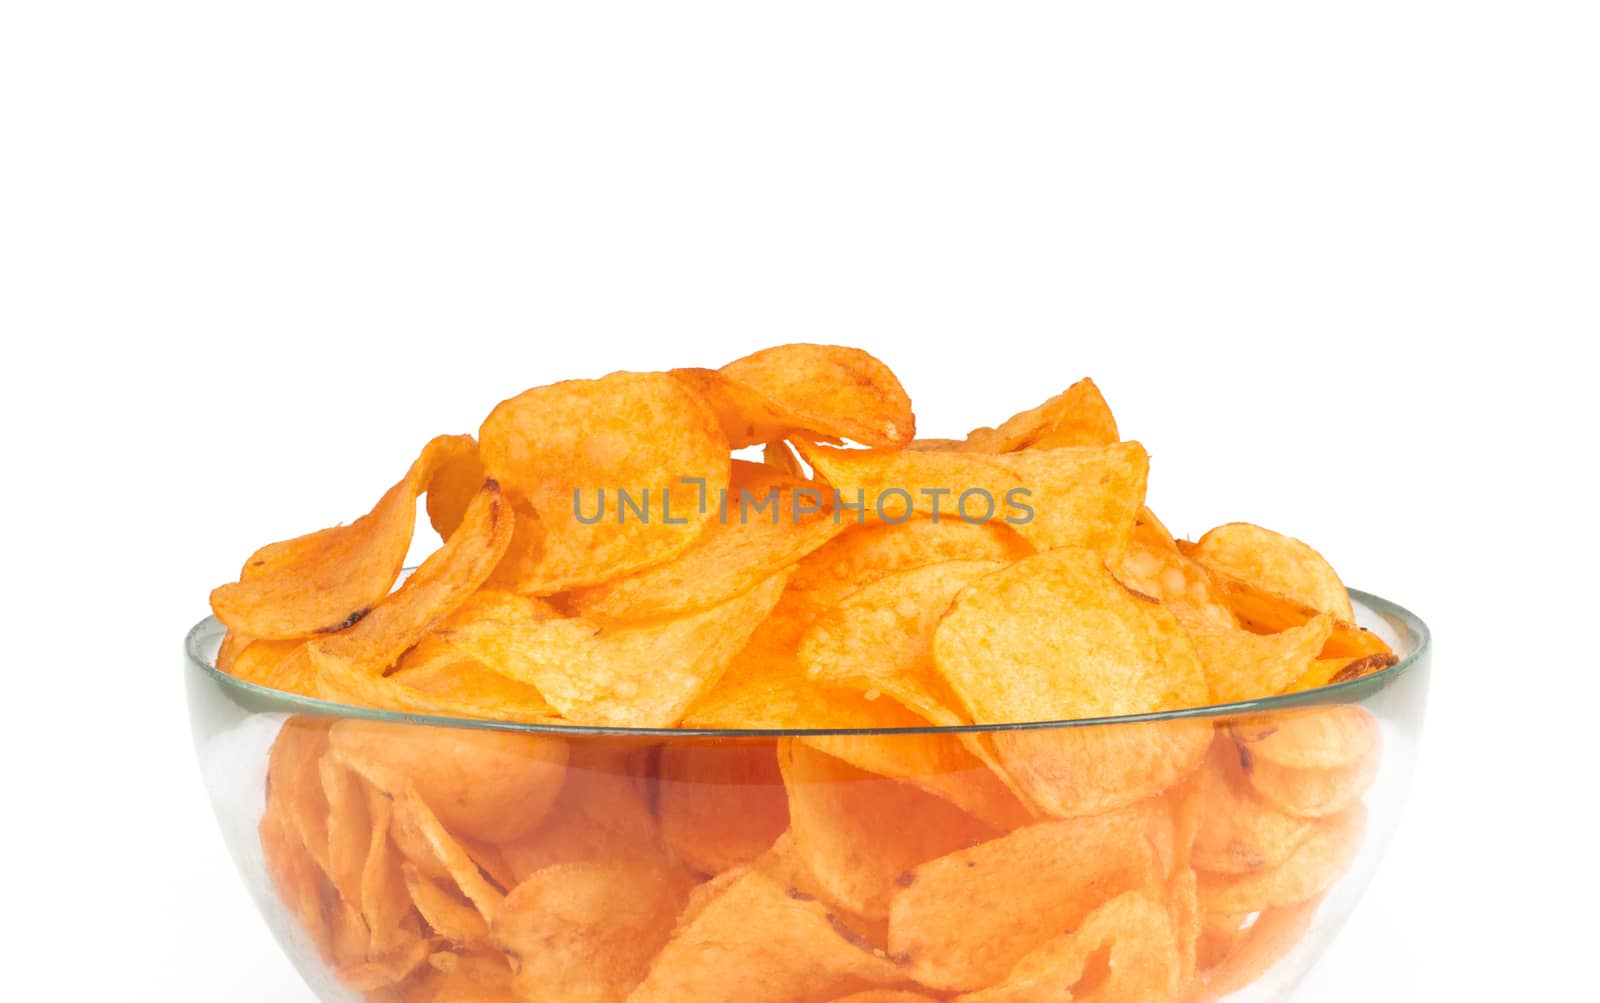 Bowl of potato chips isolated on white background